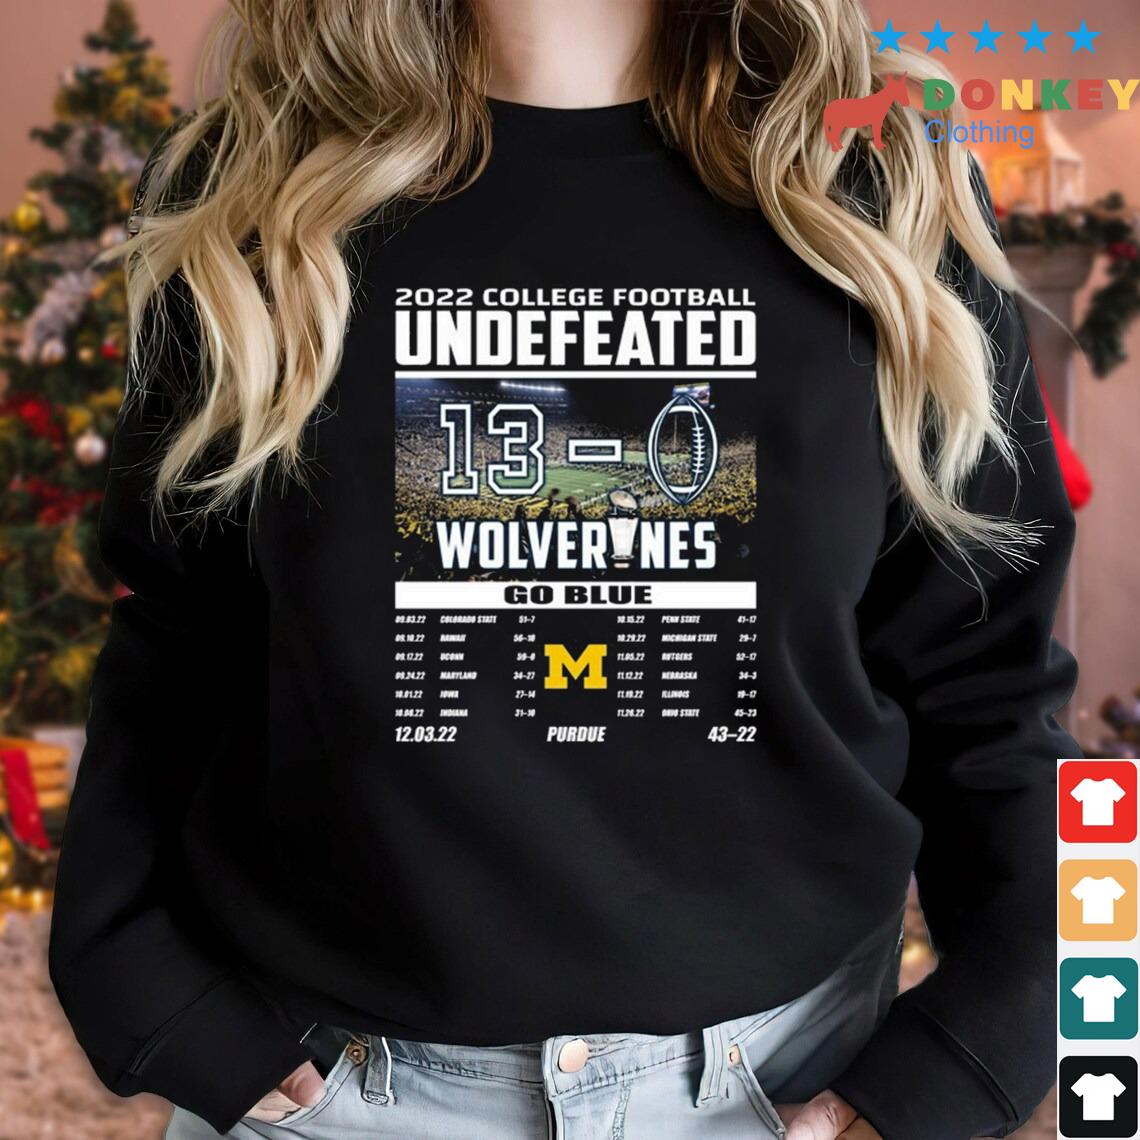 2022 College Football Undefeated Michigan Wolverines Go Blue 43-22 Purdue Shirt